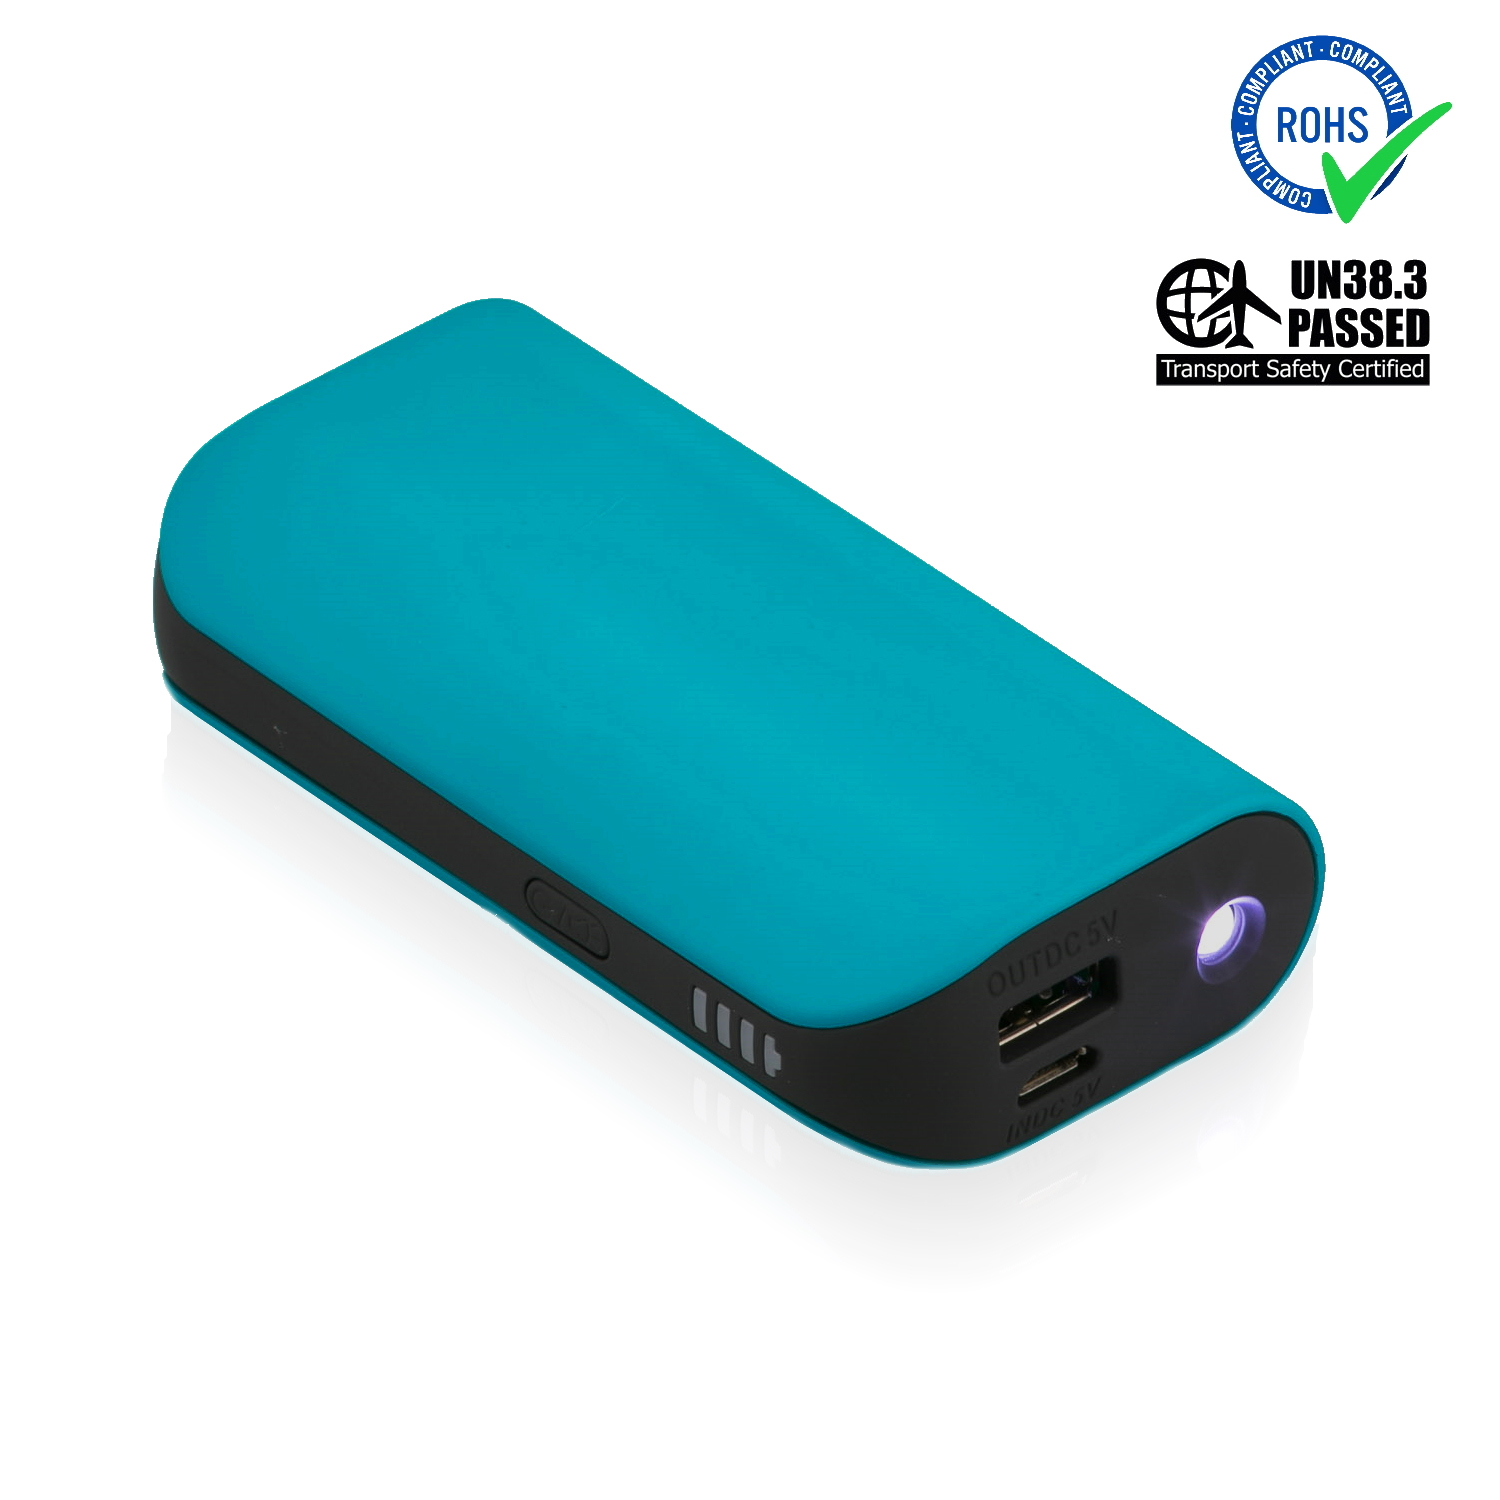 Turquoise Power Bank 5200 mAh + LED Torch